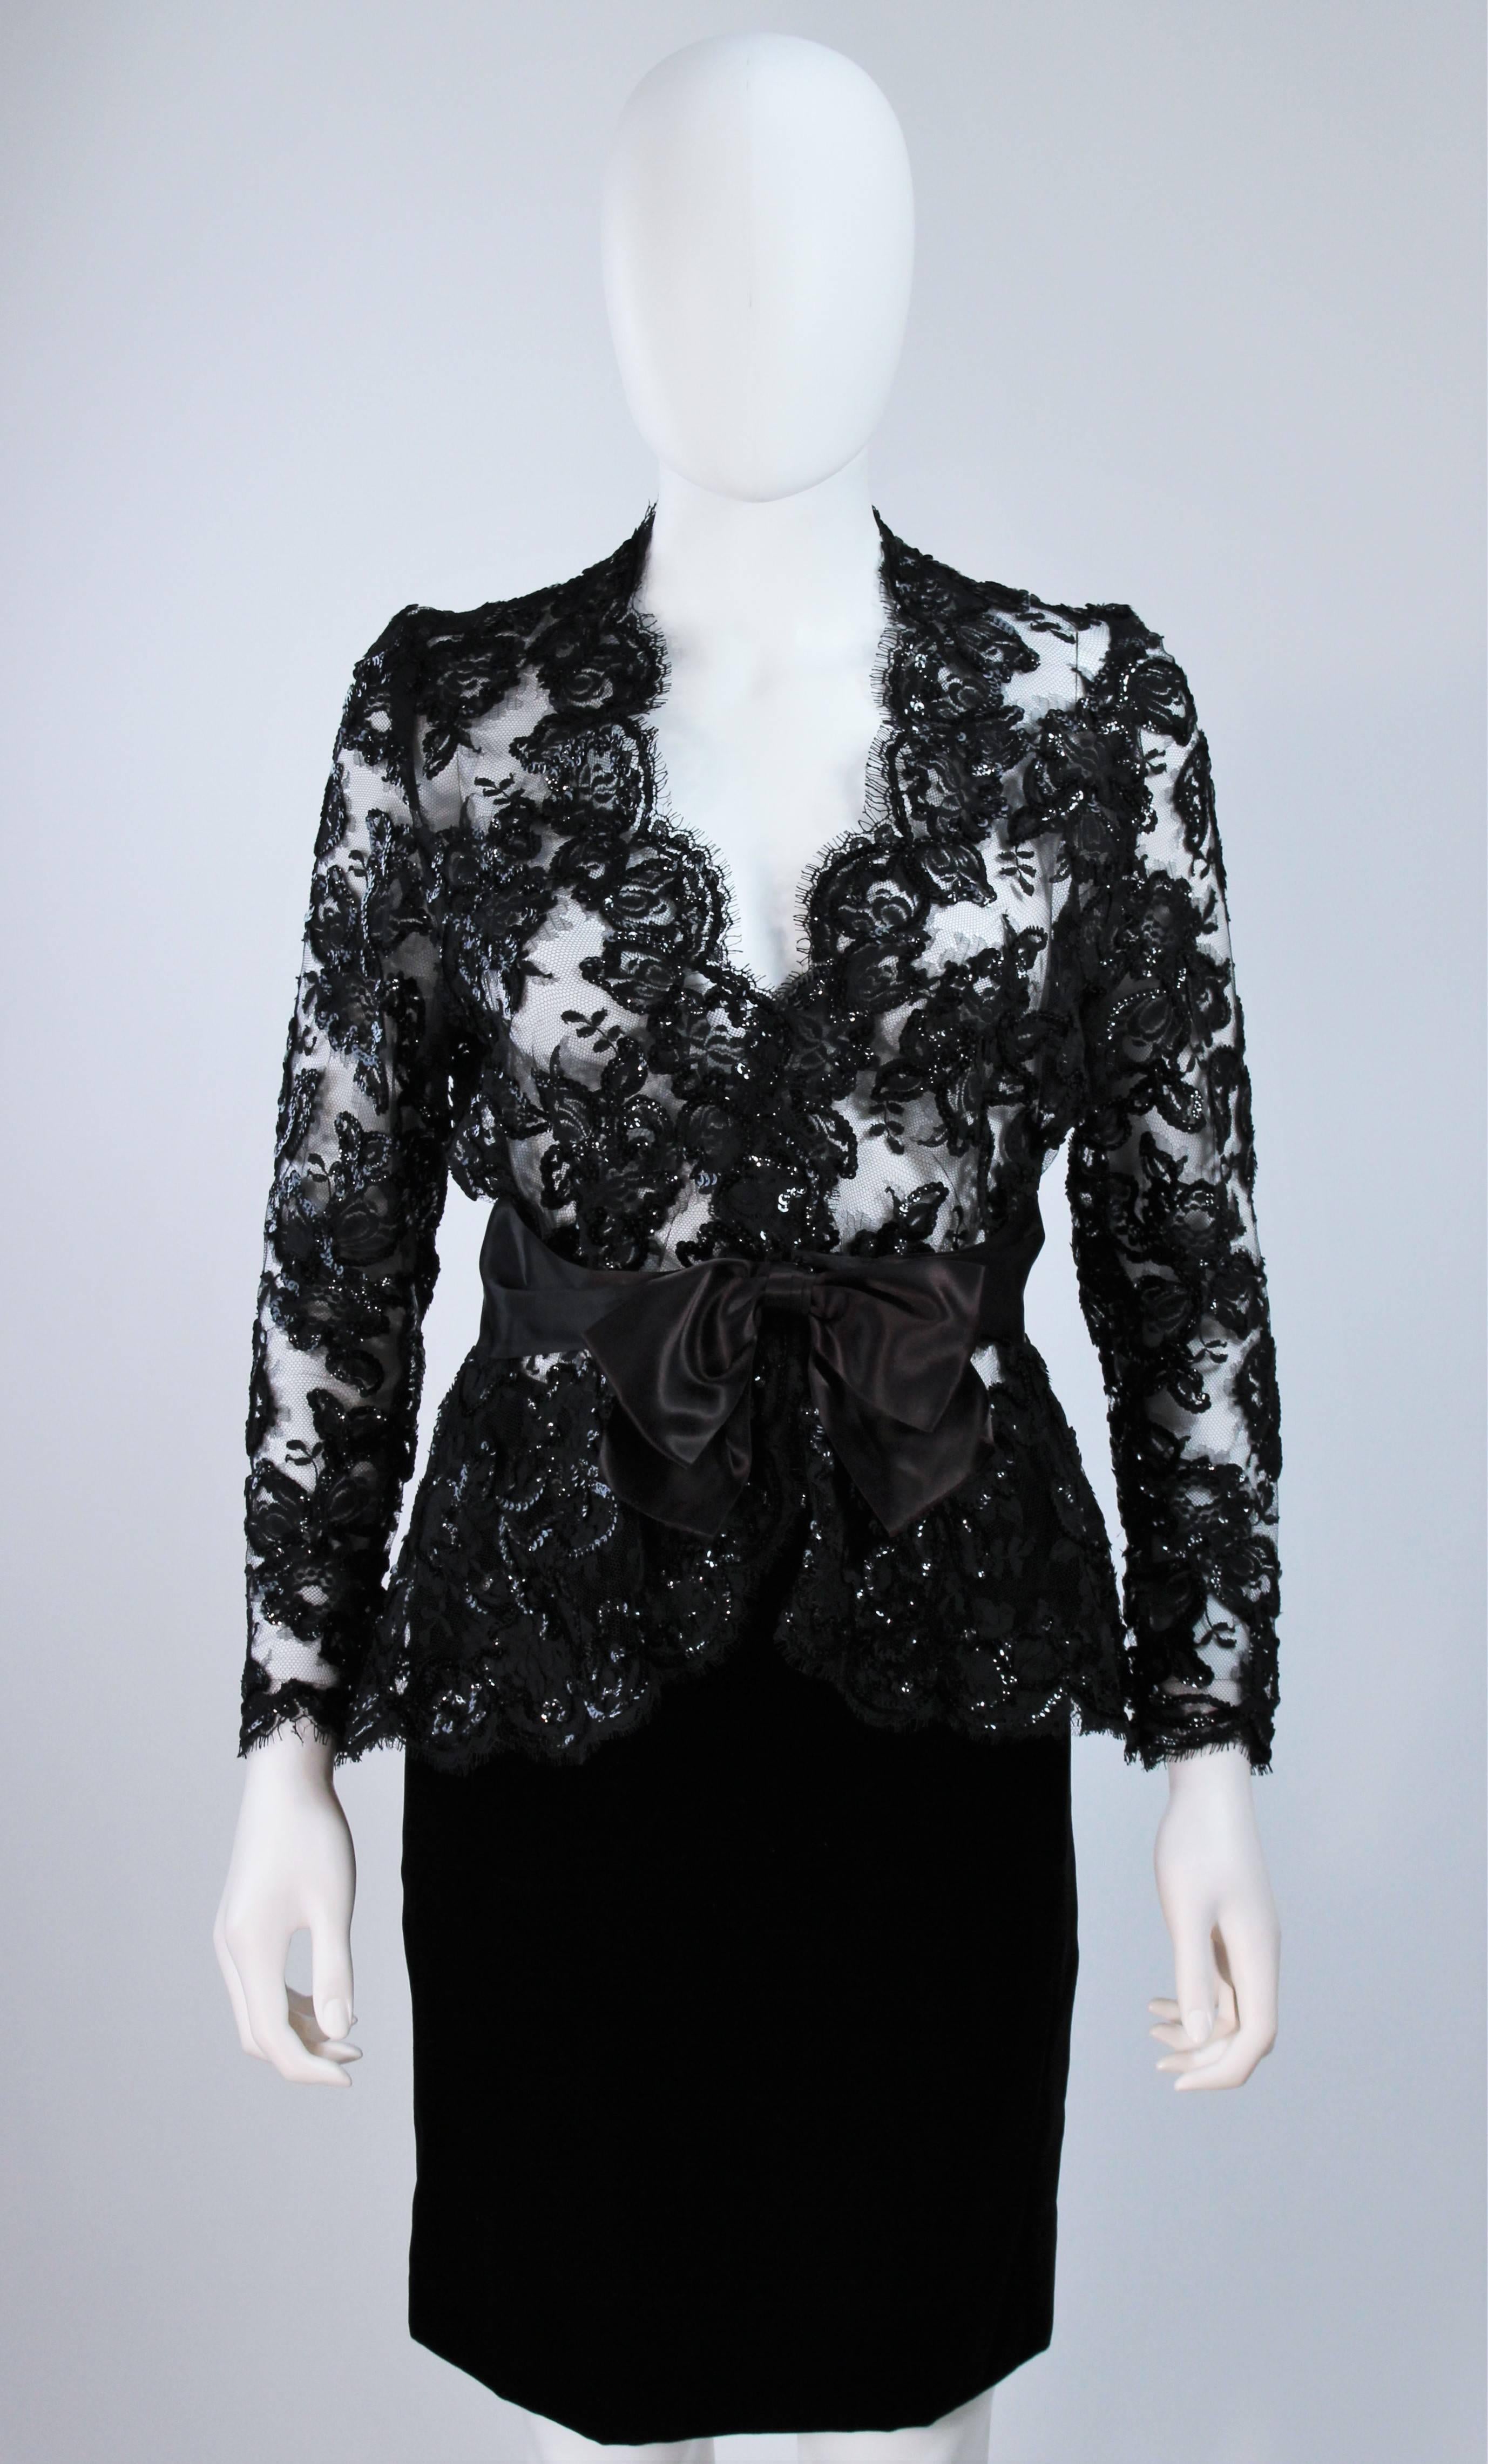  This Travilla skirt suit is composed of a black sequin embellished lace blouse with a silk bow and pencil style skirt. The blouse has center front hook and eye closures. The skirt has a zipper closure. In excellent vintage condition. 

**Please